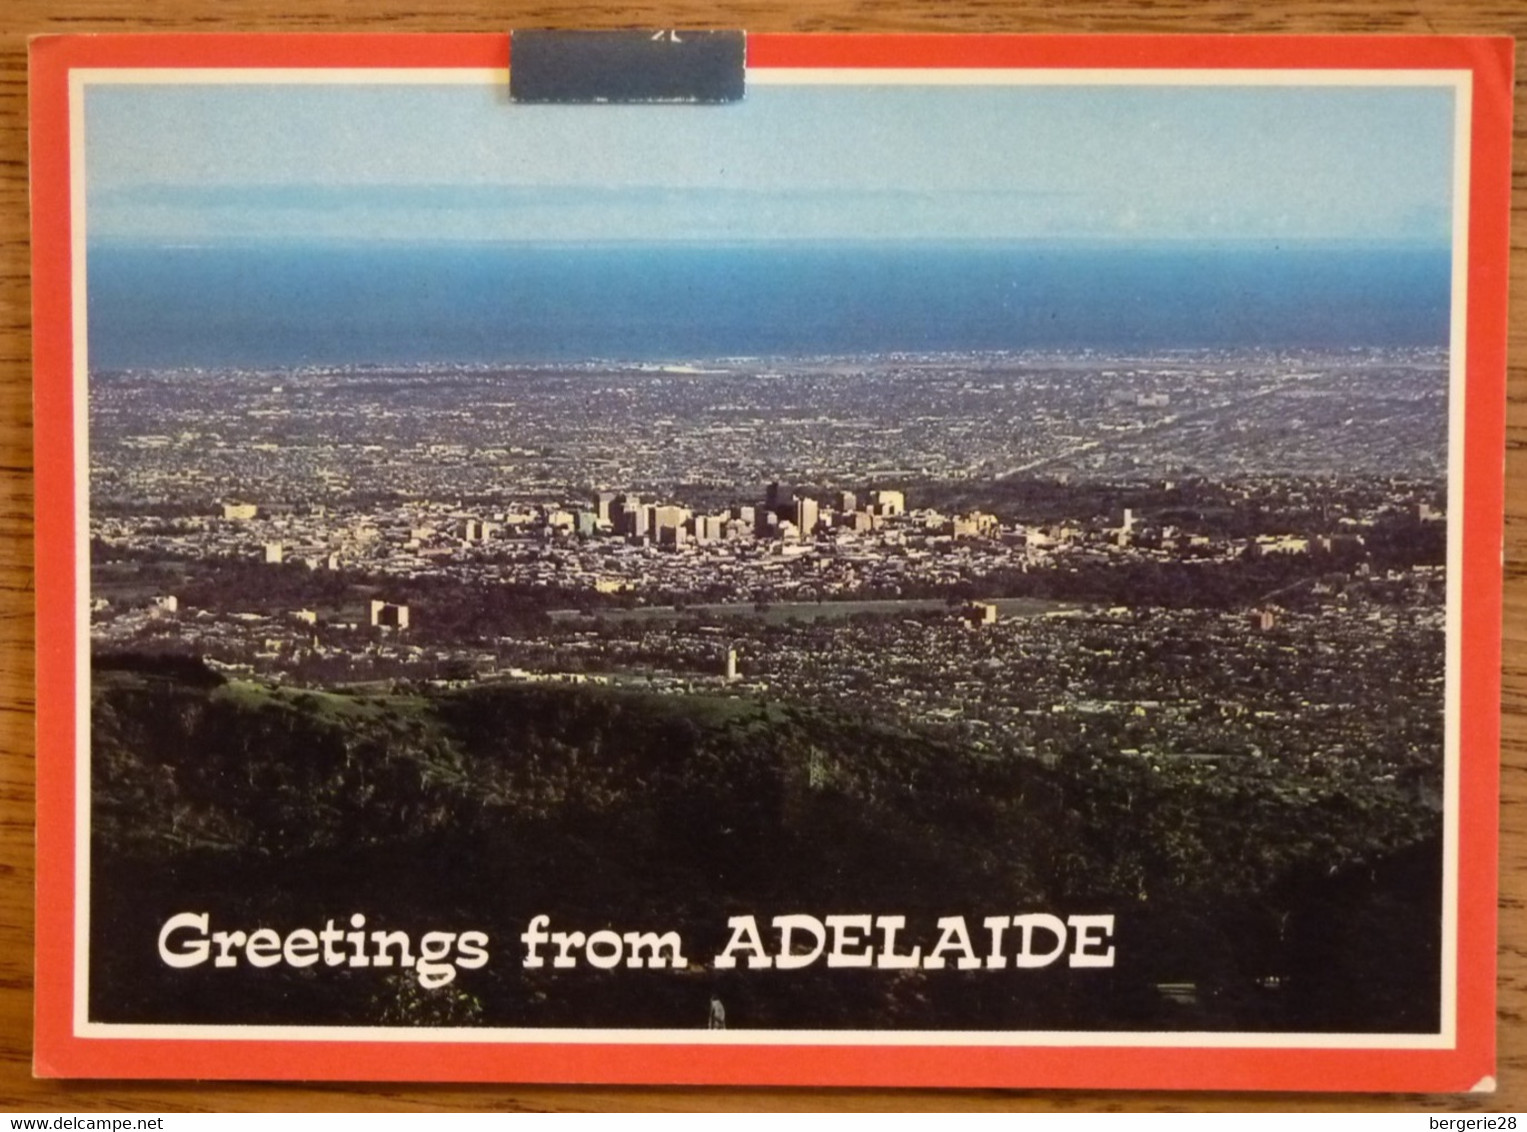 CPA AUSTRALIE - ADELAIDE - GREETINGS FROM ADELAIDE - VUE AÉRIENNE - ADELAIDE CITY FROM MOUNT LOFTY KIOSK - - Adelaide